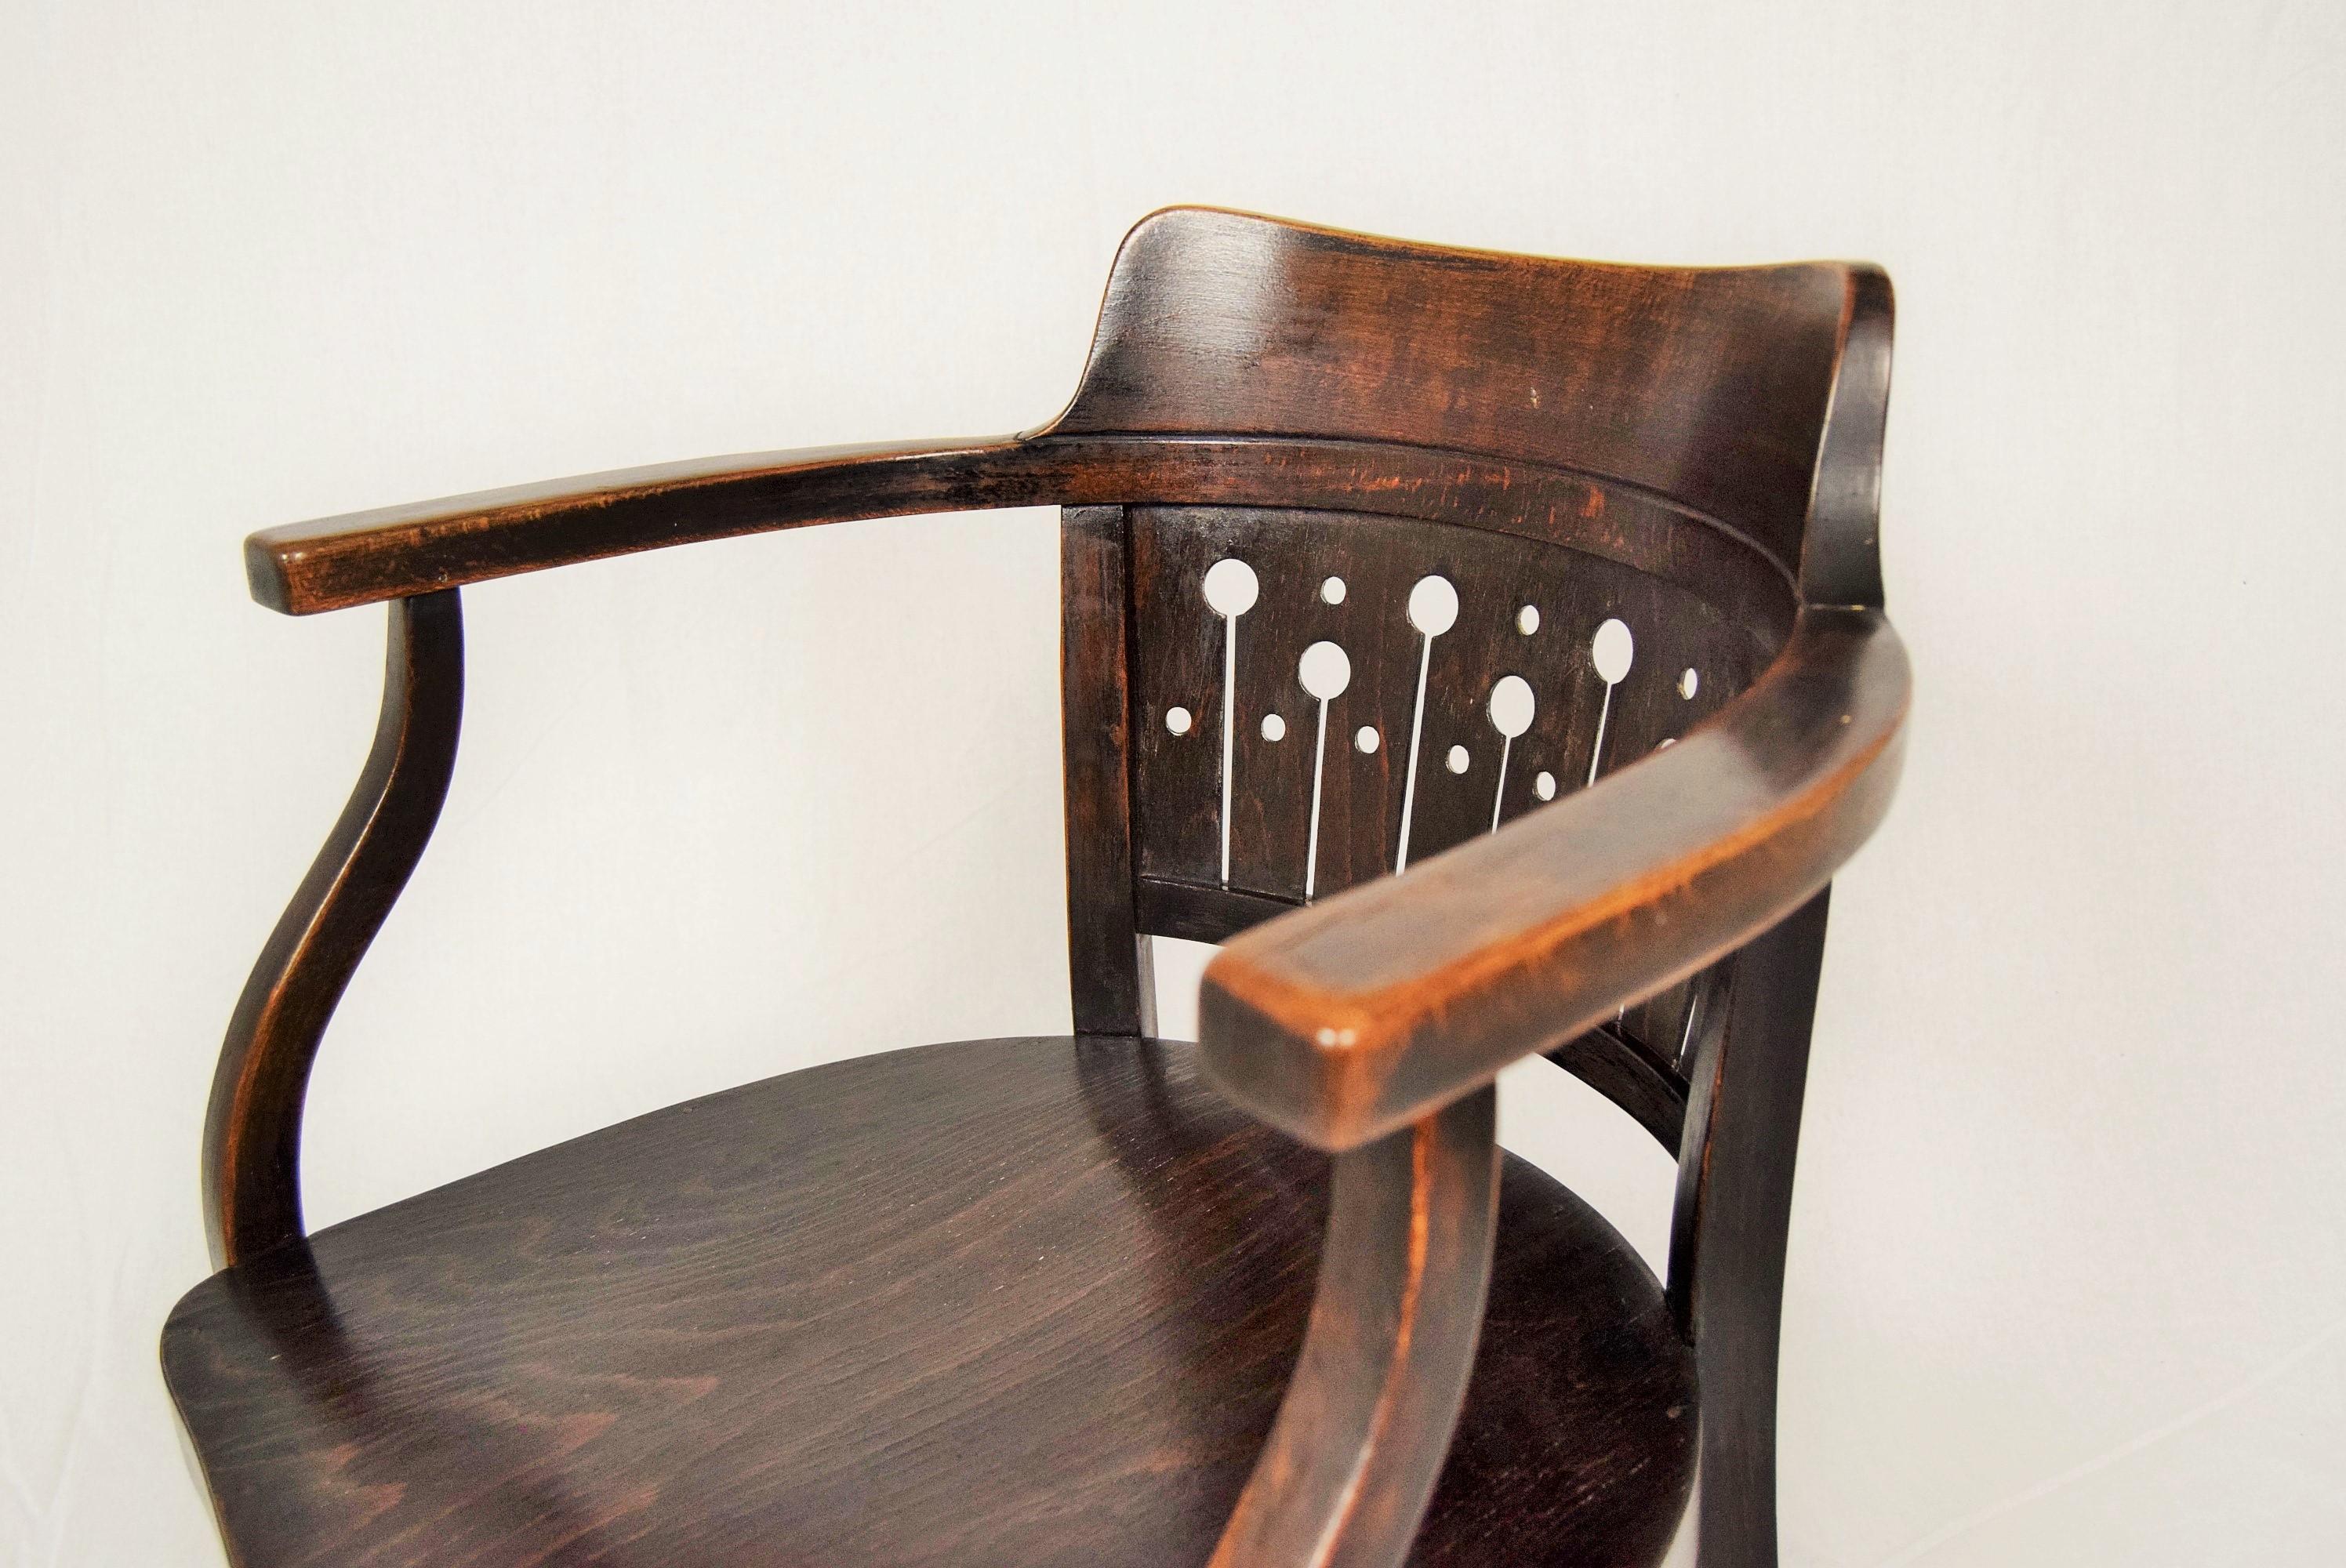 A Vienna secession beech Armchair by Otto Wagner, manufactured by Thonet in circa 1905.
This Armchair is in good original condition. 
The Armchair is made from dark stained bentwood (beech).
The surface was cleaned and repolished.